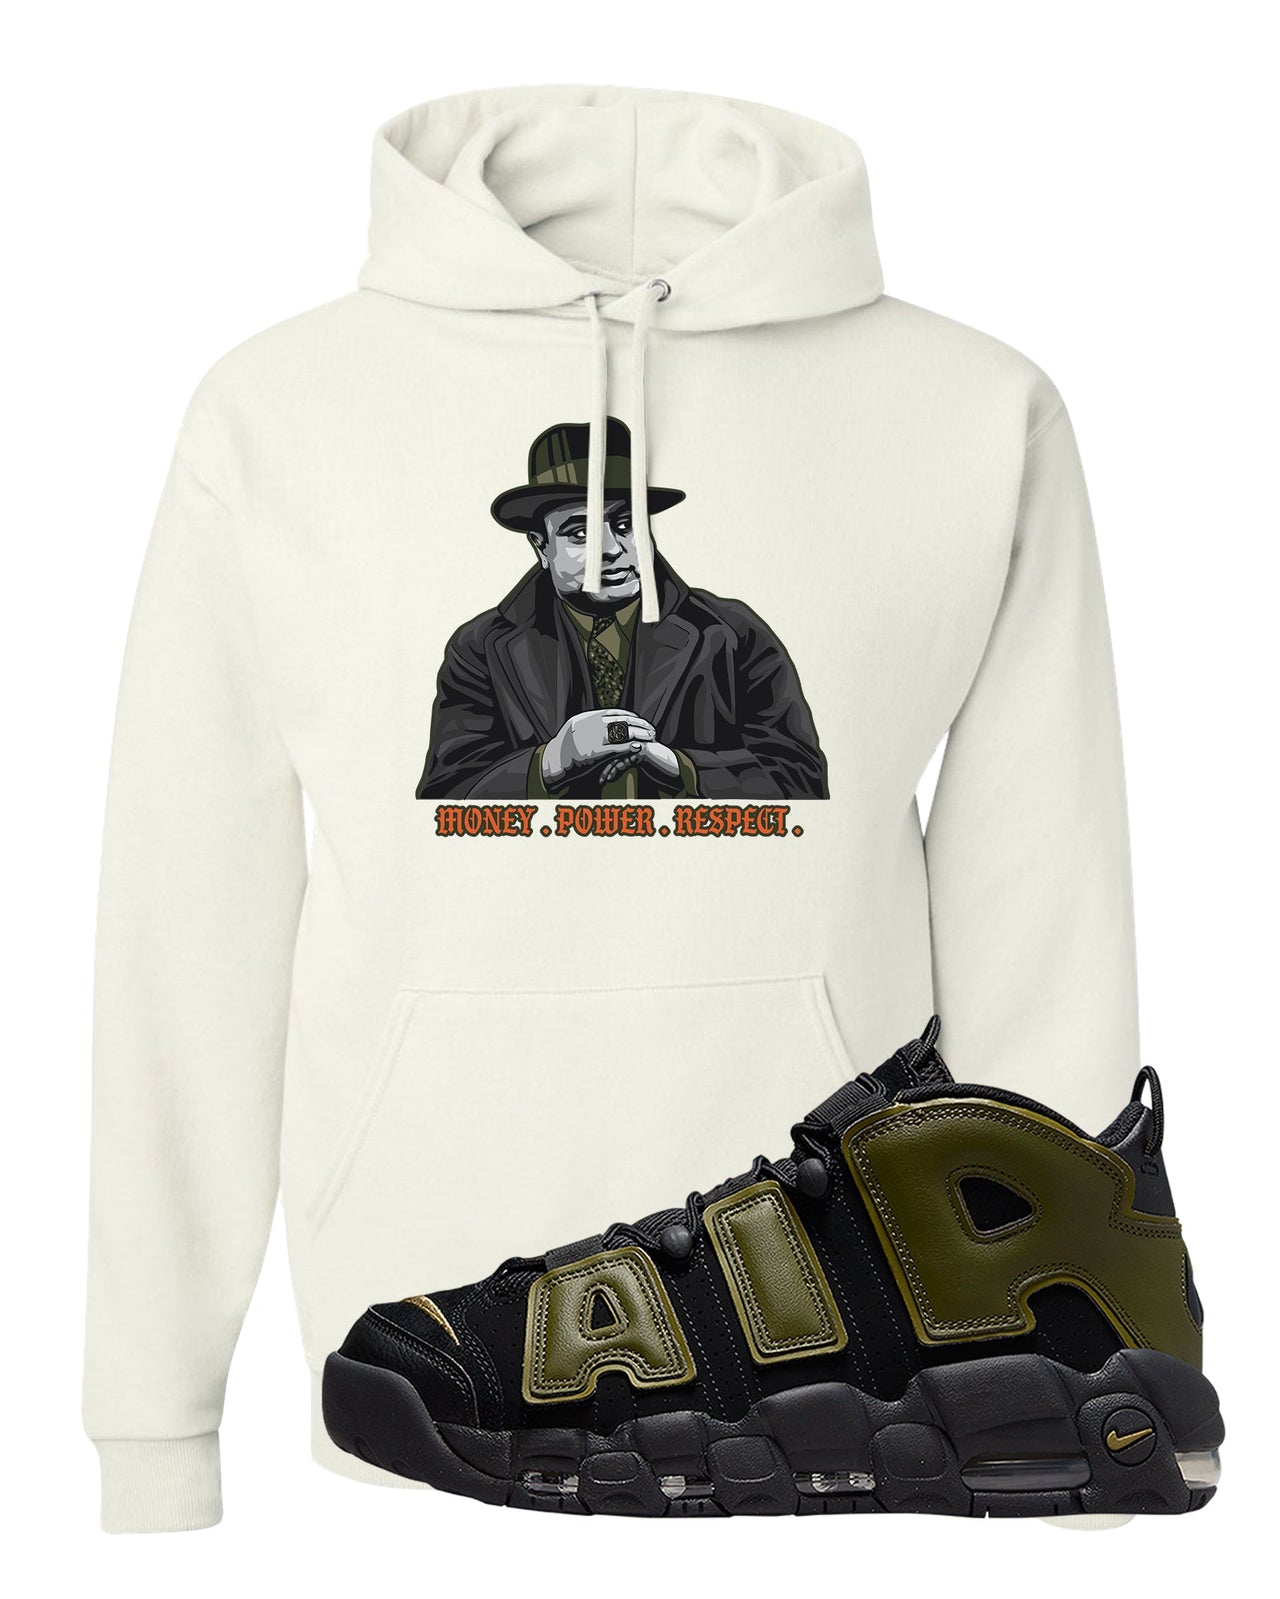 Guard Dog More Uptempos Hoodie | Capone Illustration, White